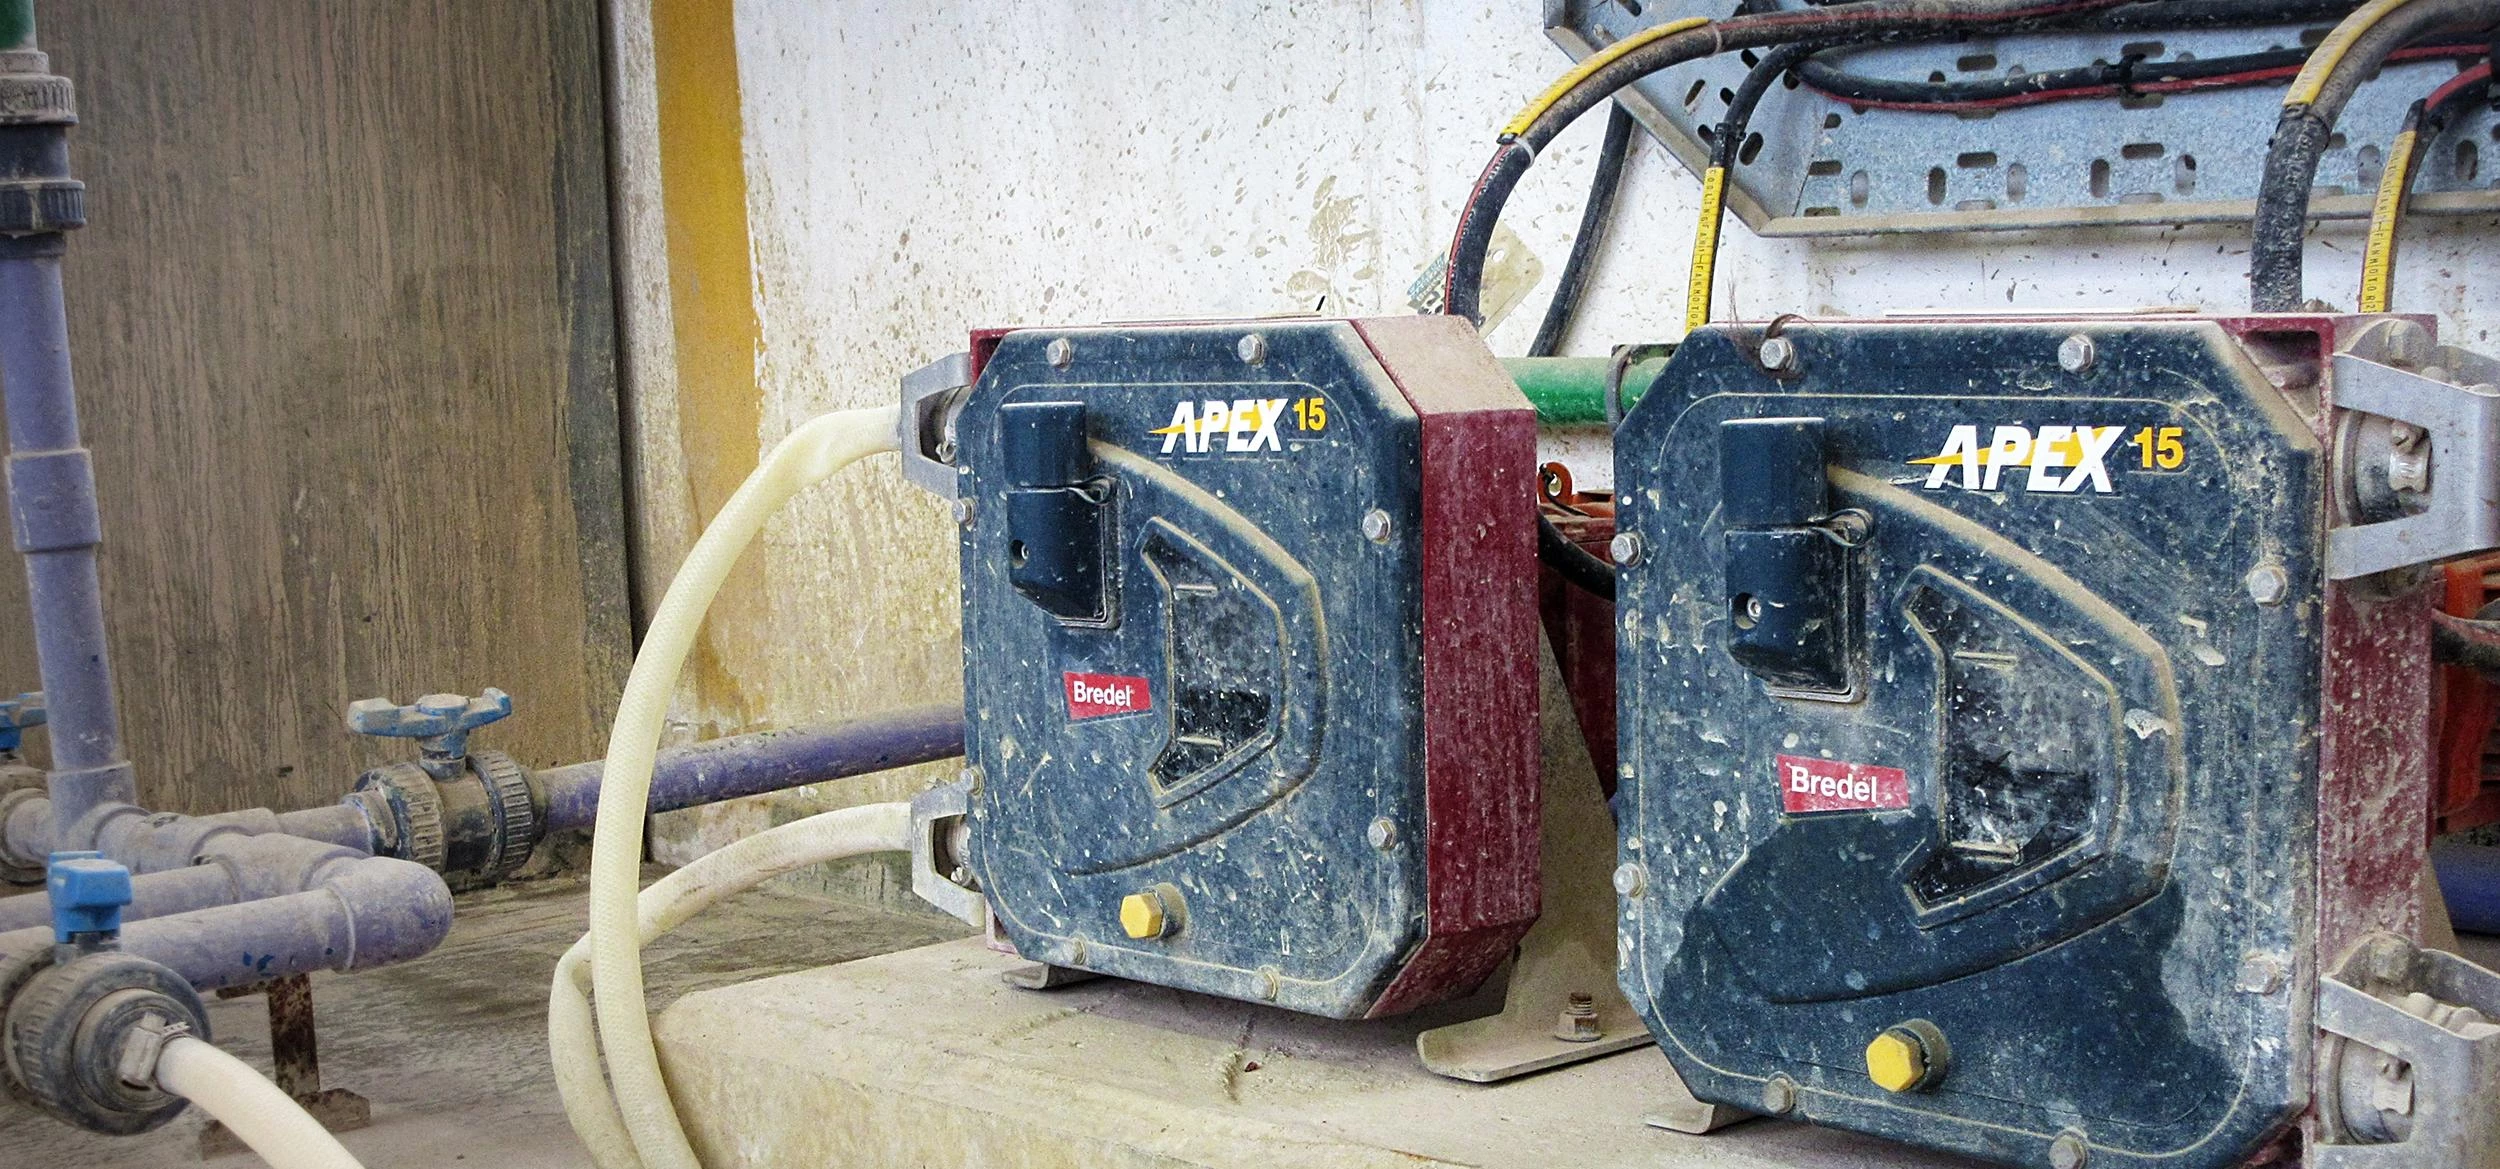 APEX hose pumps replace PC pumps for reliable bentonite pumping at South African waterworks